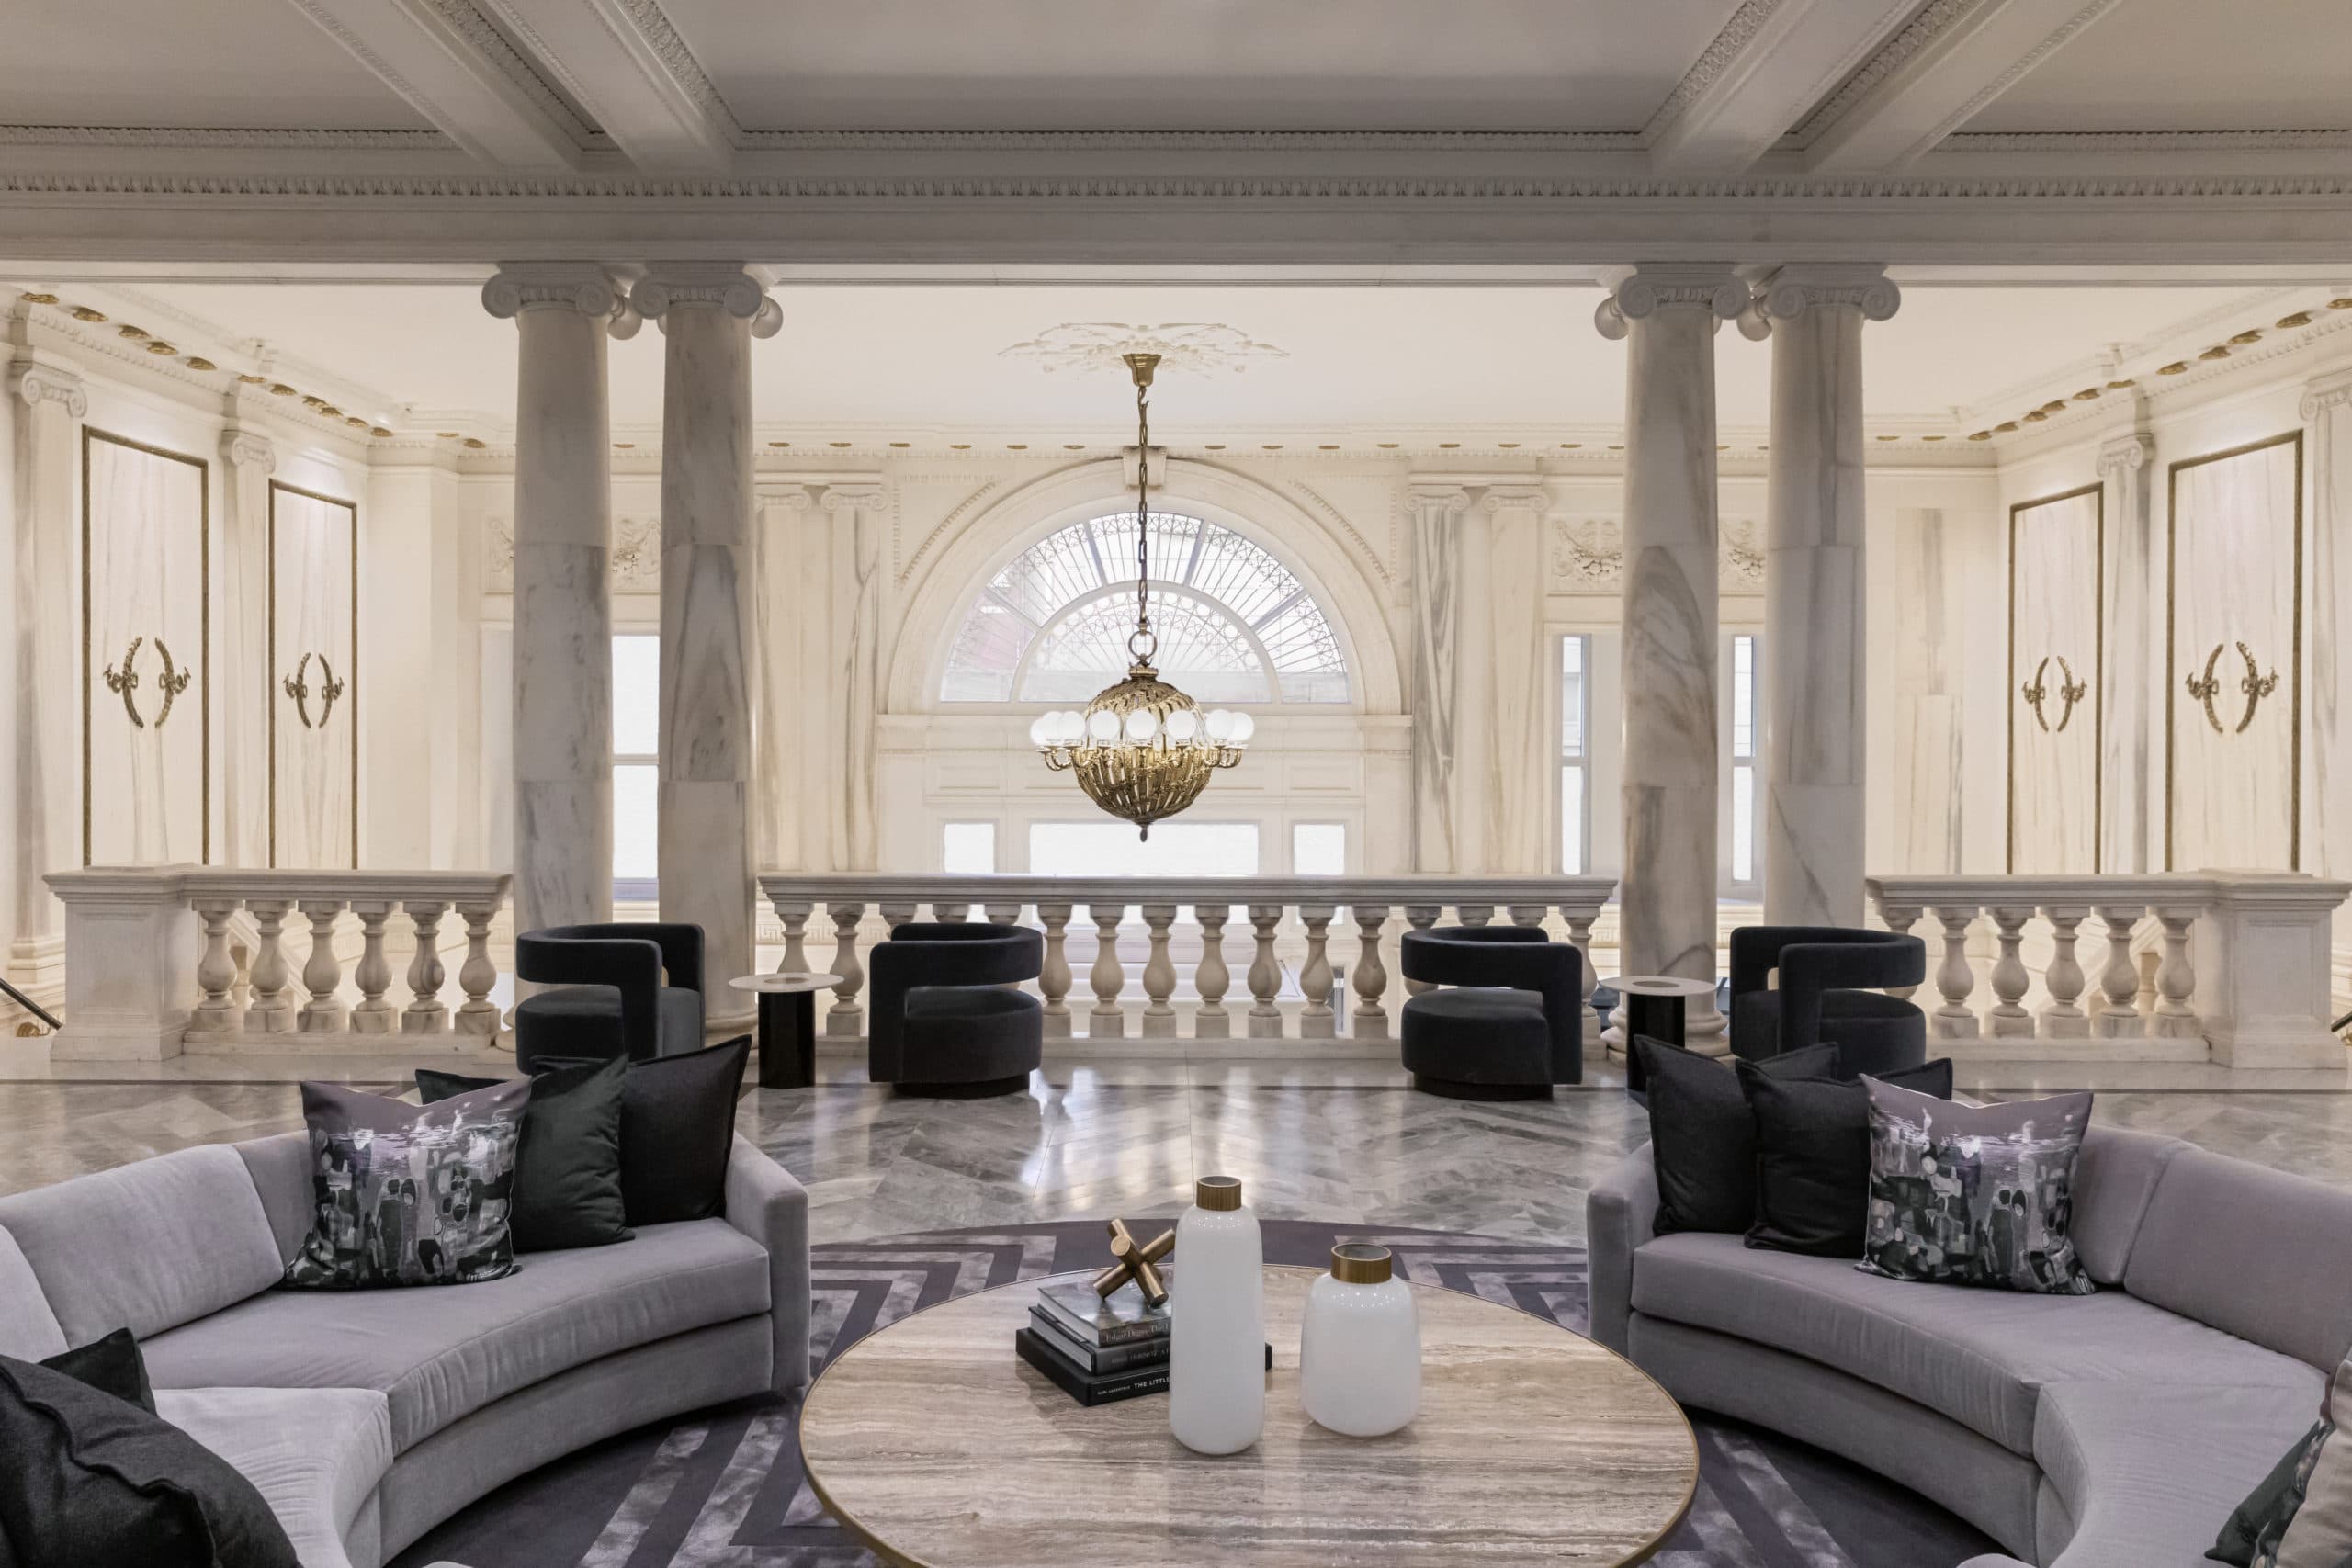 Interior modern sitting area inside 108 Leonard in NYC. It is decorated with marble columns and white and black furniture.